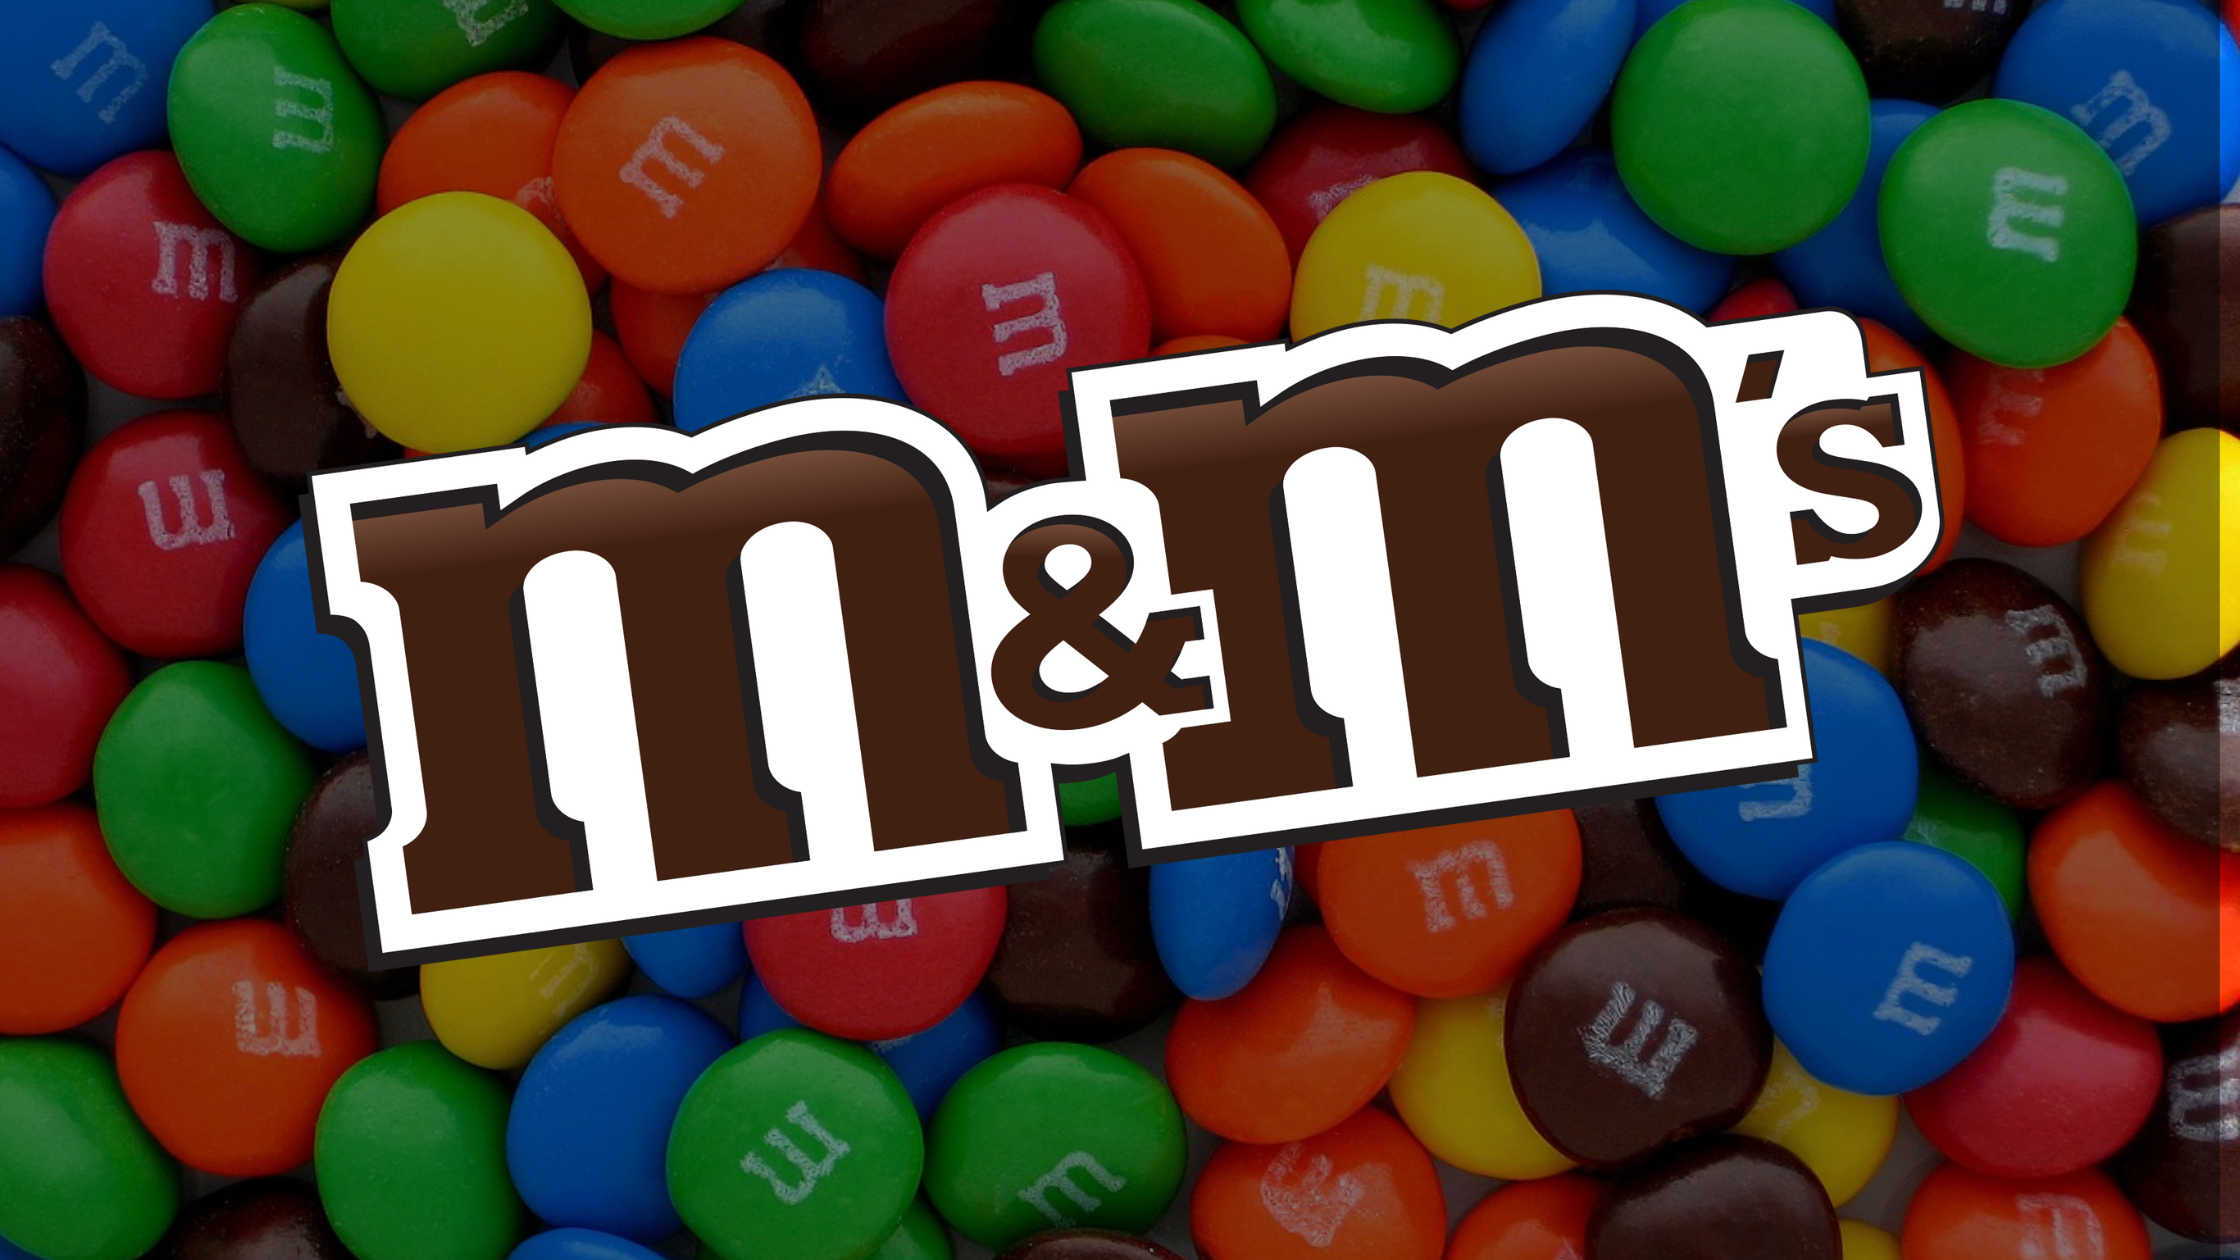 You can now buy Peanut M&M's peanut butter